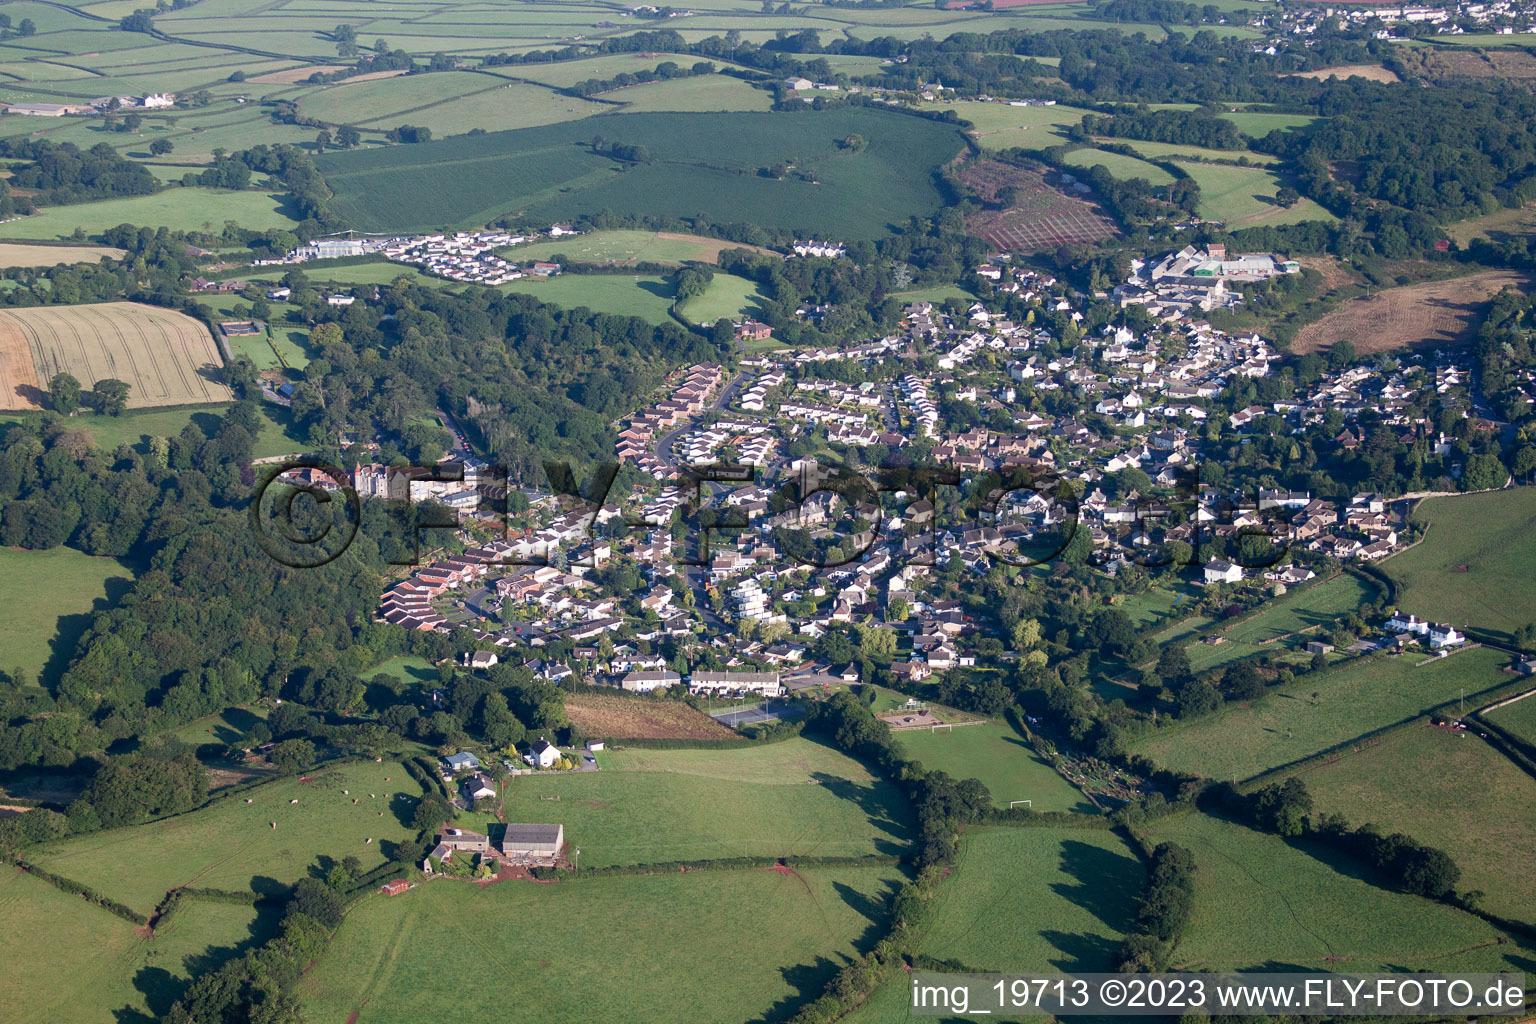 Kingskerswell in the state England, Great Britain from above